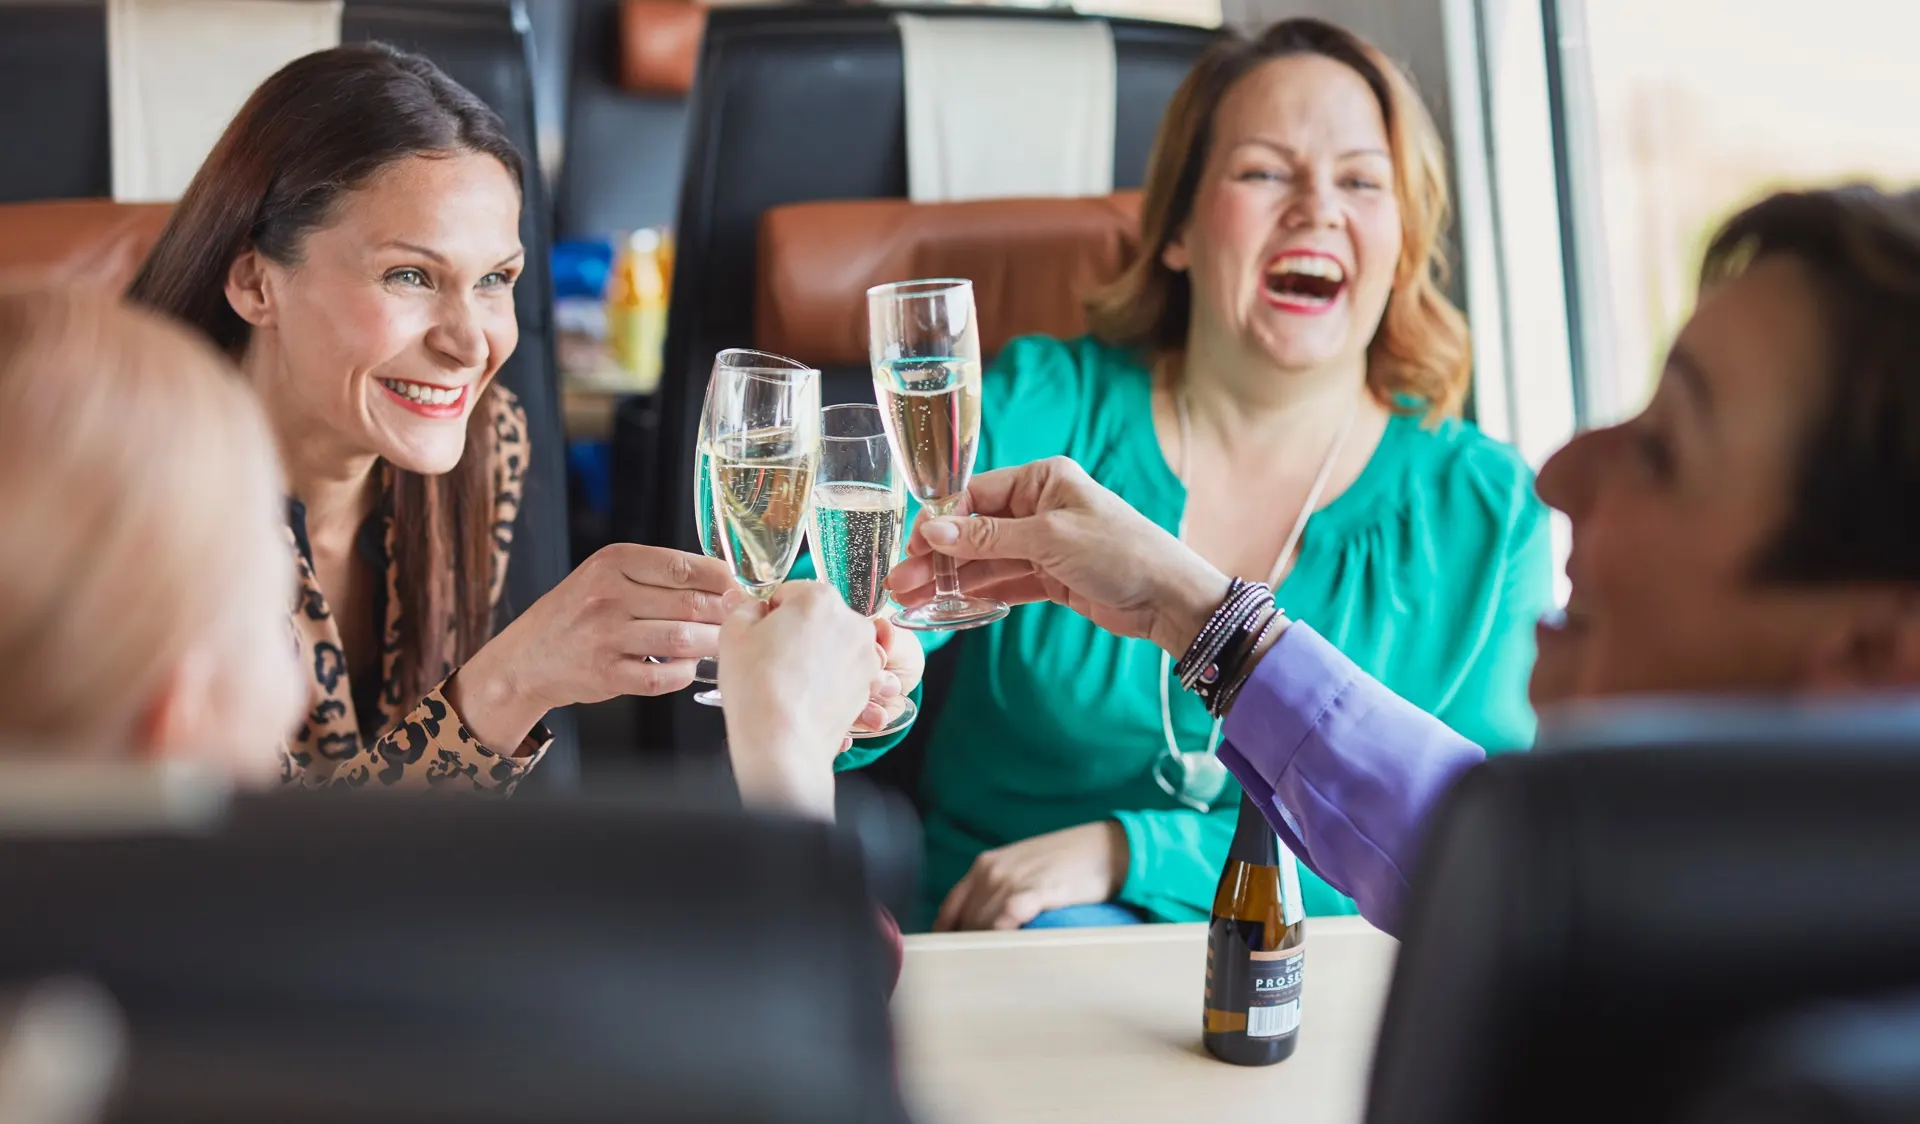 A cheerful group is toasting with sparkling wine in the upstairs of the restaurant car.